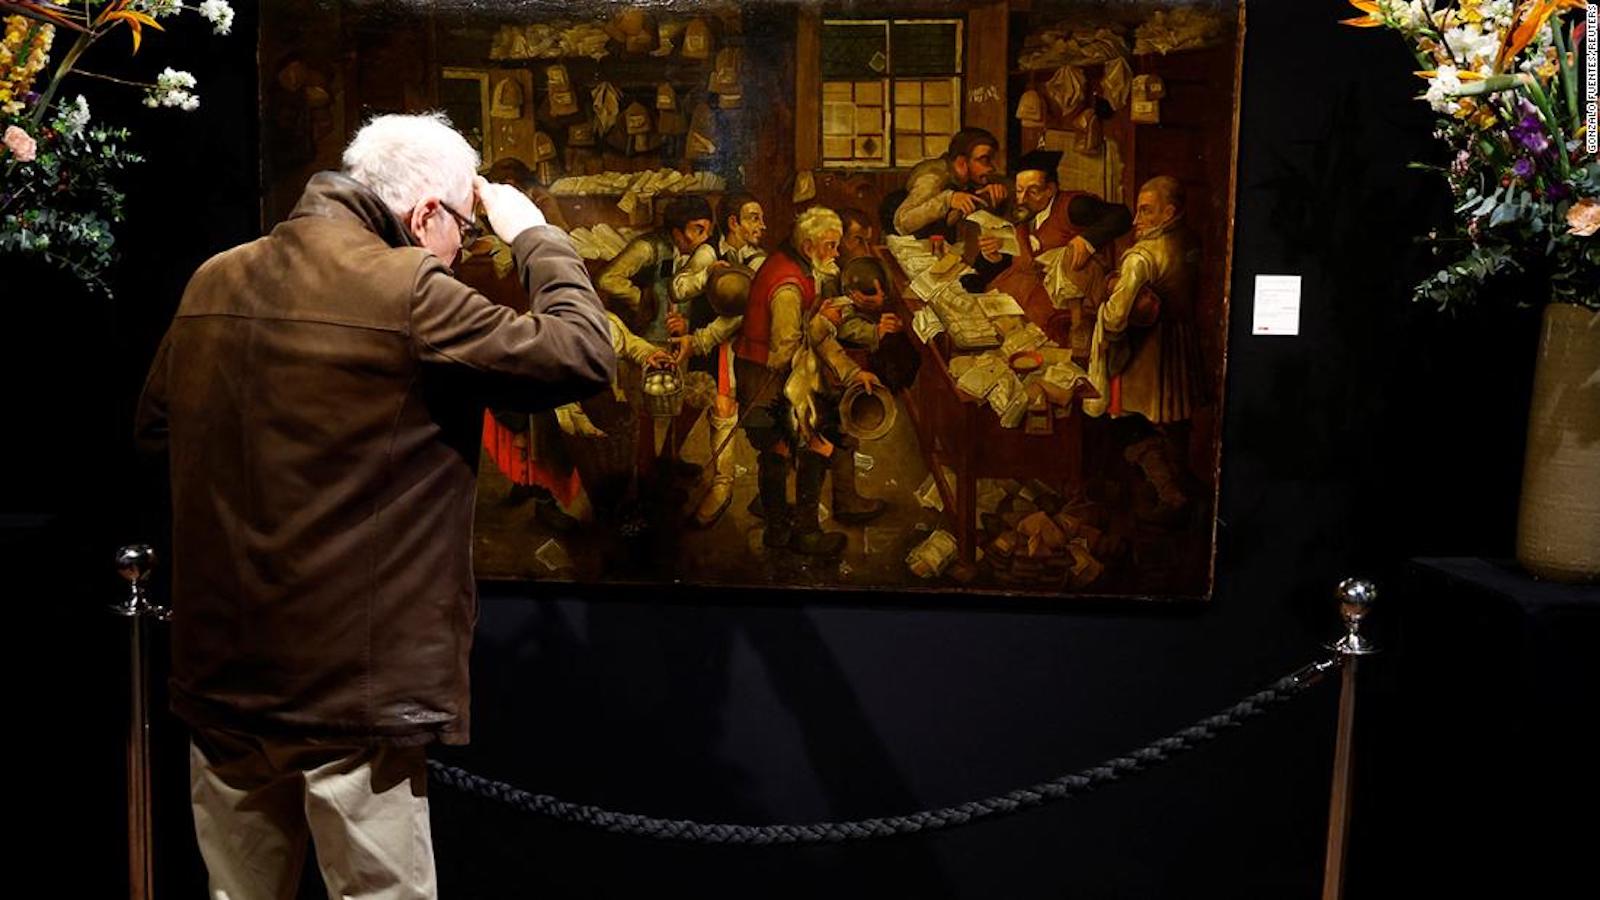 Dusty painting hidden behind the door turned out to be a “masterpiece” of Brueghel